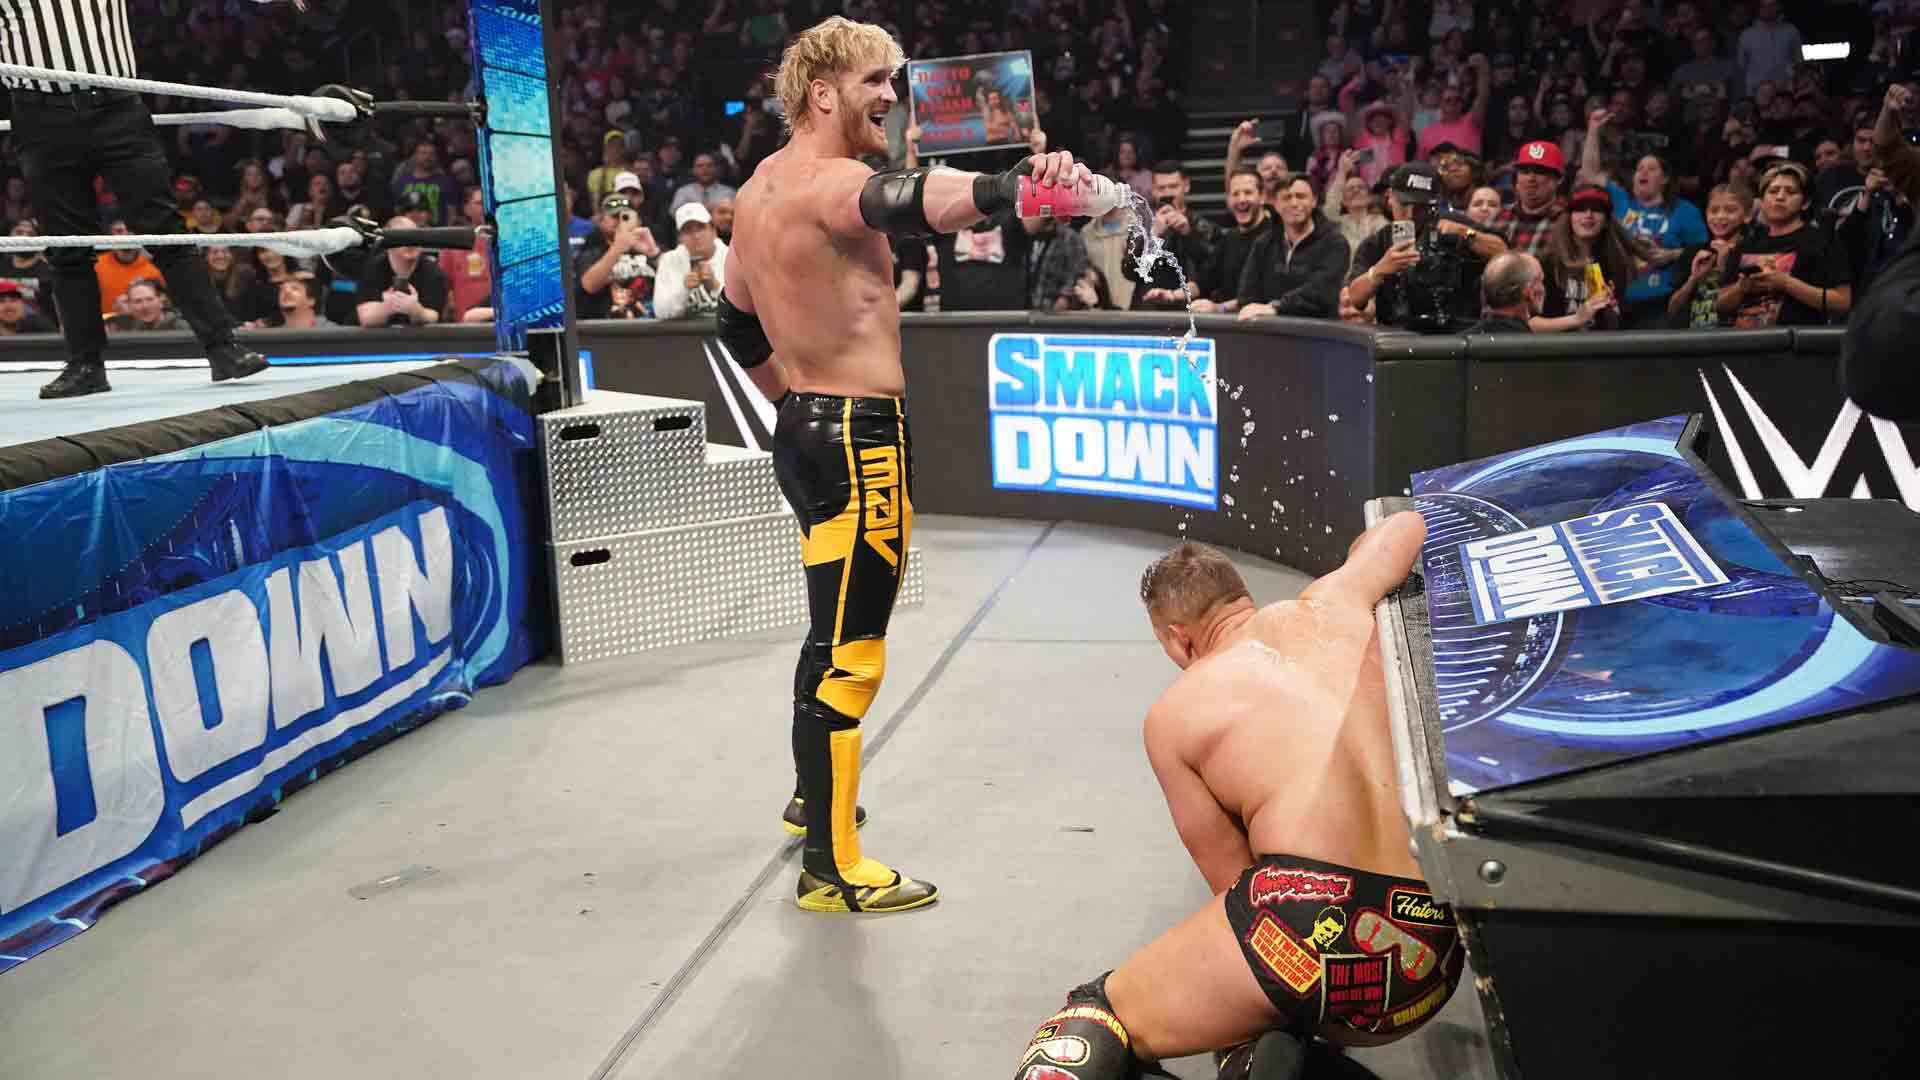 WWE Flashback: Iconic Moments and Unforgettable Battles from February 26-March 3